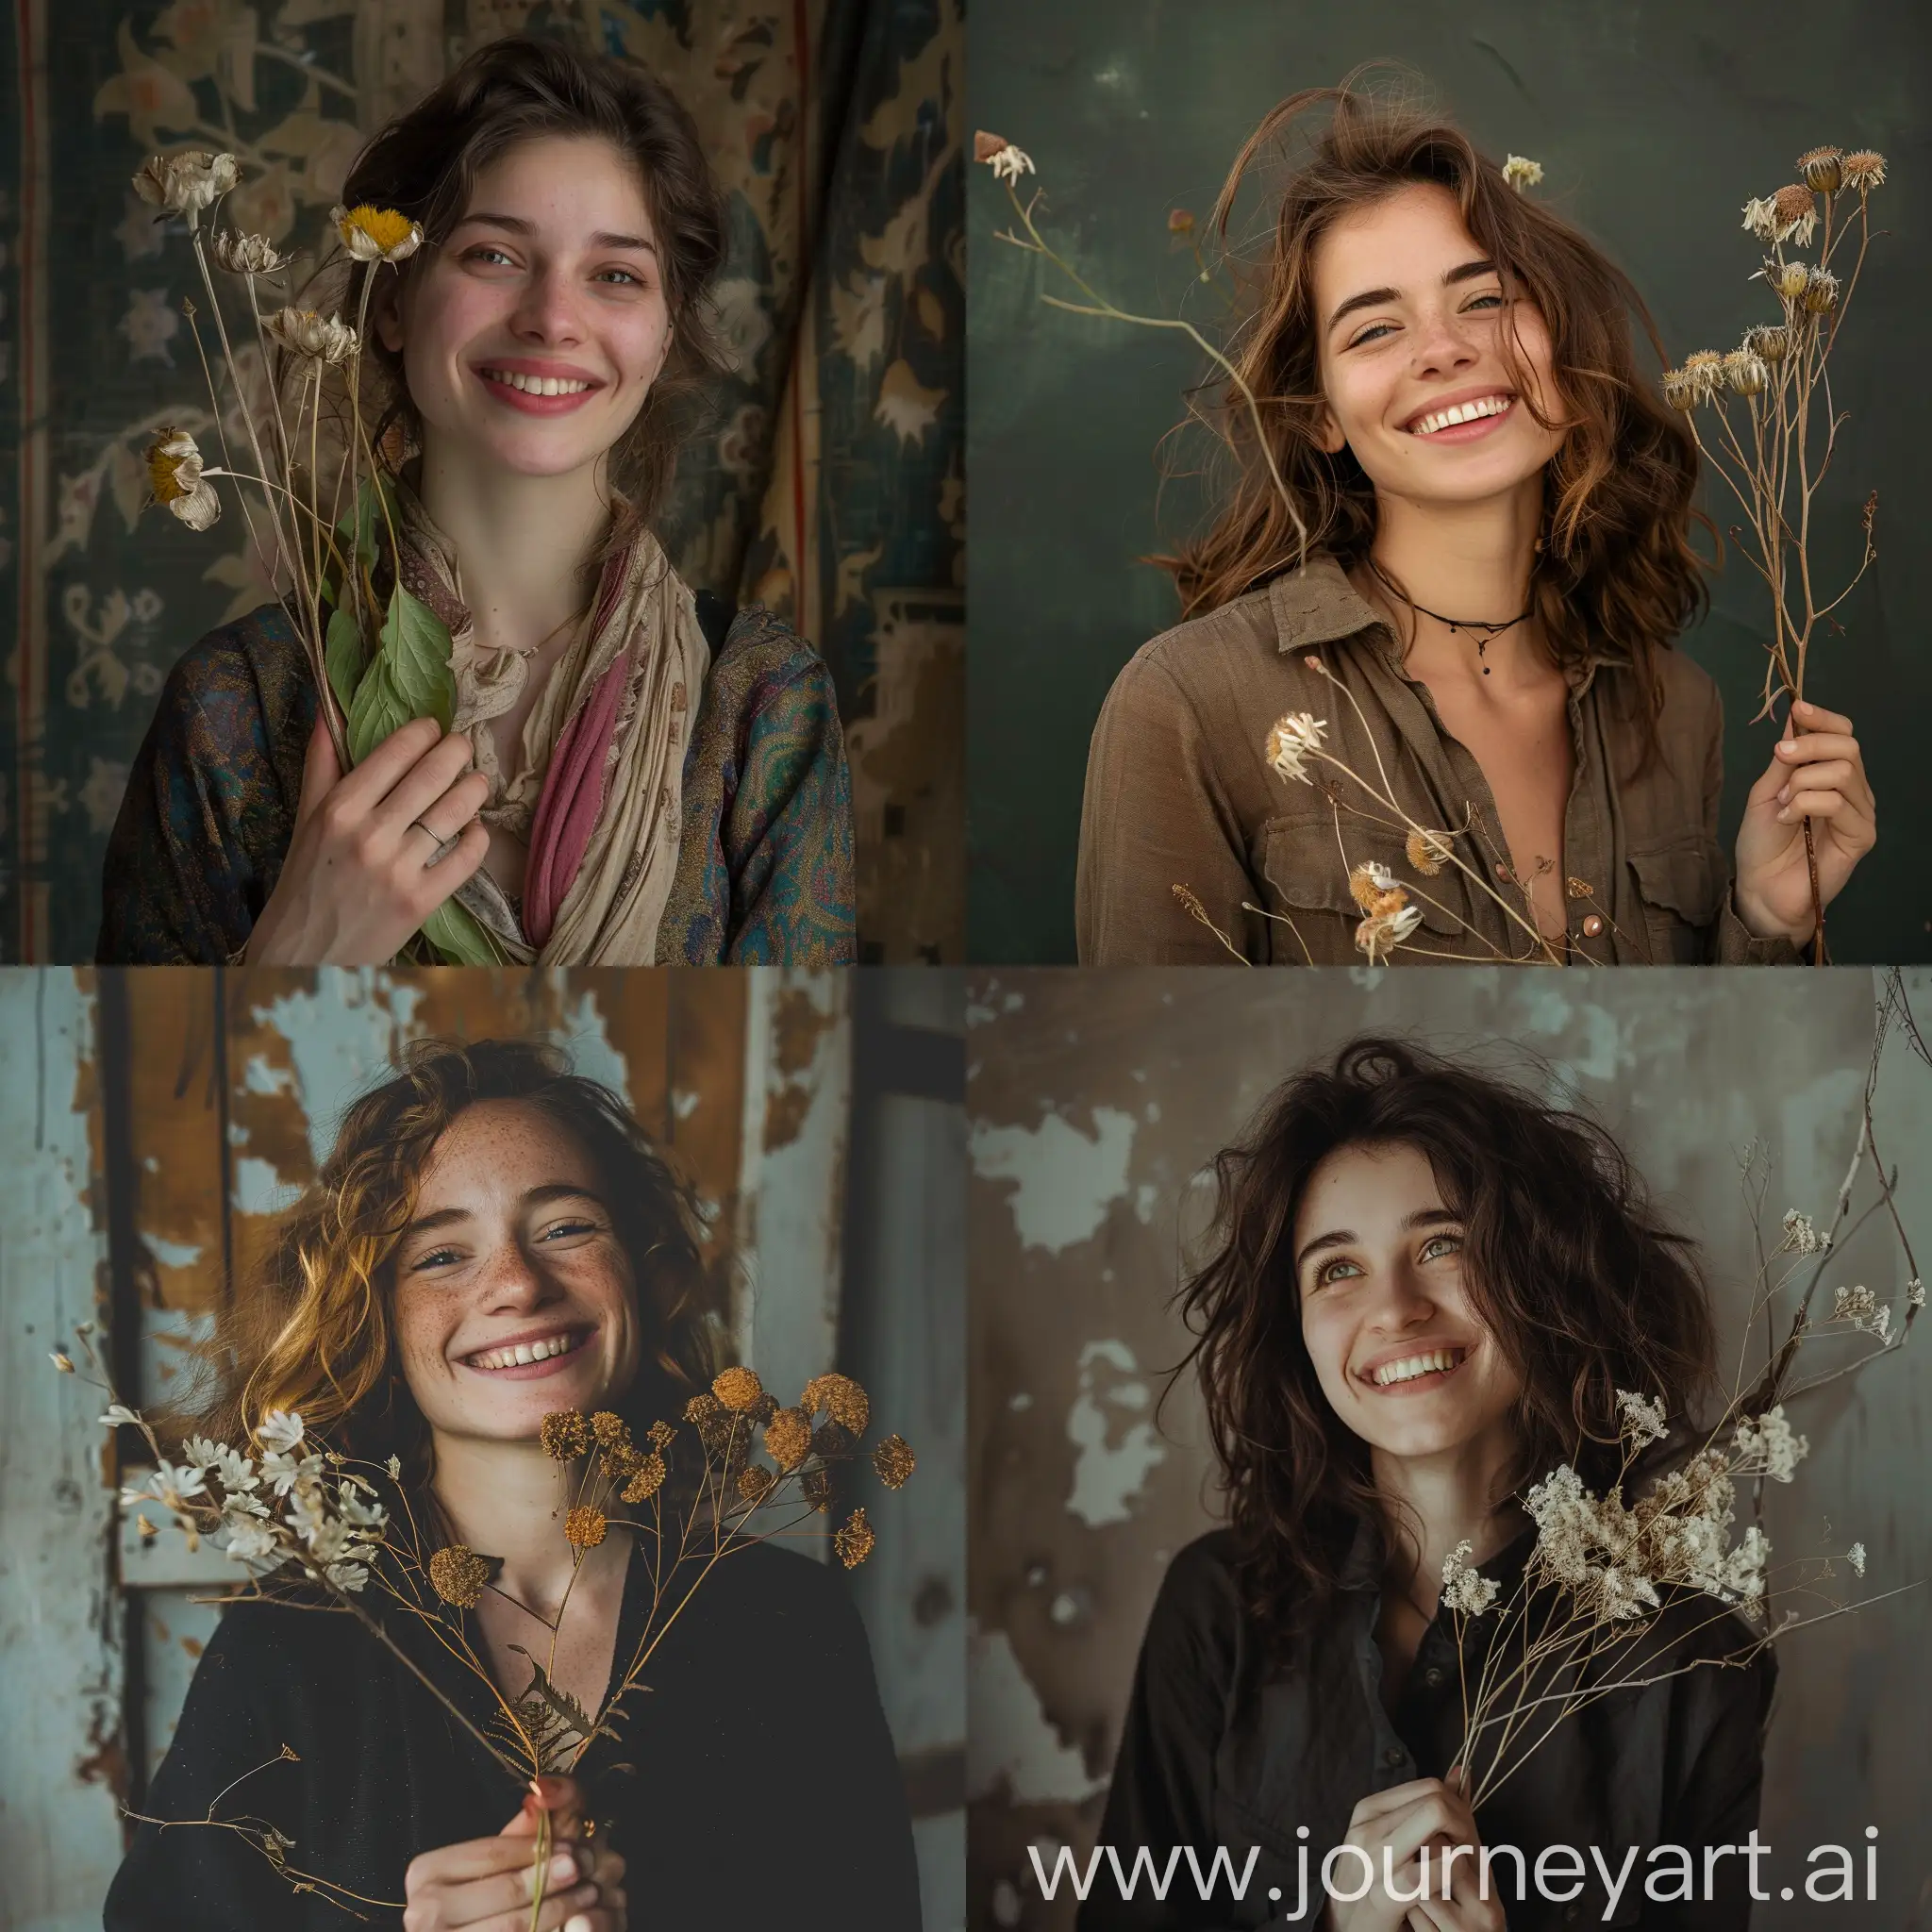 Smiling-Woman-with-Dead-Flowers-Artistic-Composition-Photo